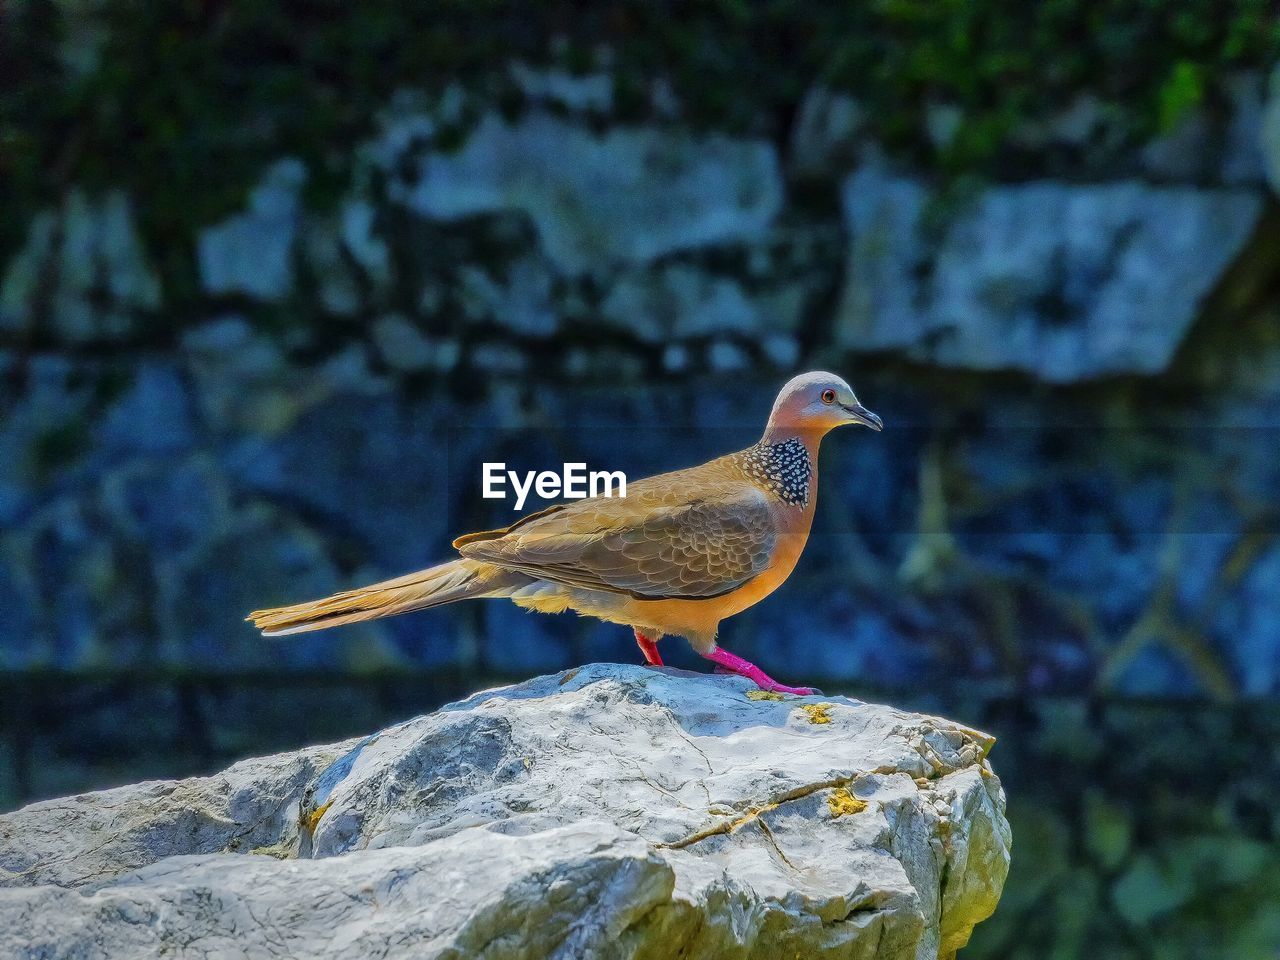 Mourning dove perching on rock